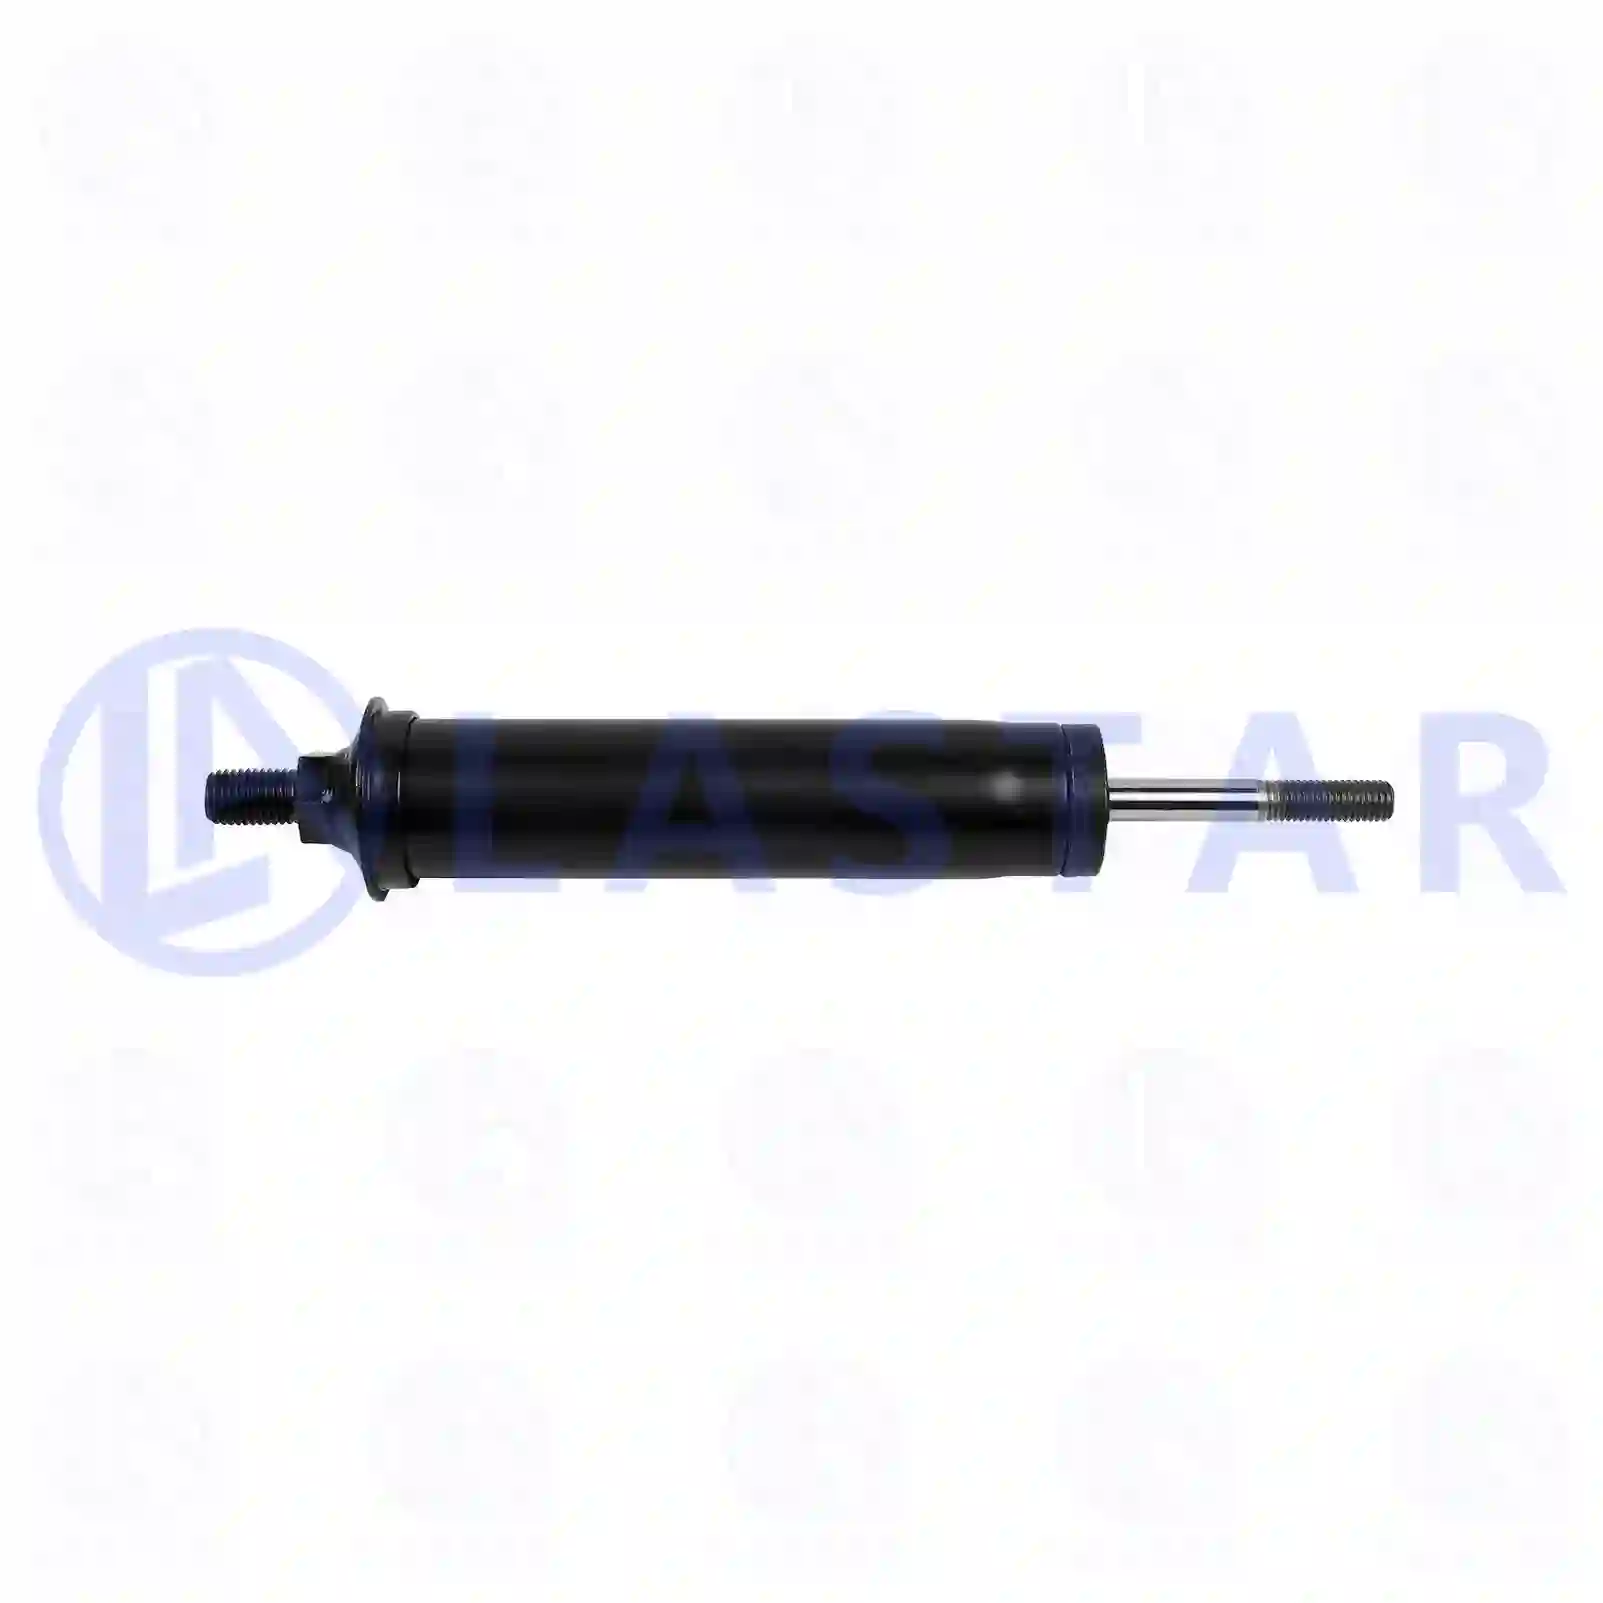 Cabin shock absorber, 77736033, 1381906, , , , , ||  77736033 Lastar Spare Part | Truck Spare Parts, Auotomotive Spare Parts Cabin shock absorber, 77736033, 1381906, , , , , ||  77736033 Lastar Spare Part | Truck Spare Parts, Auotomotive Spare Parts